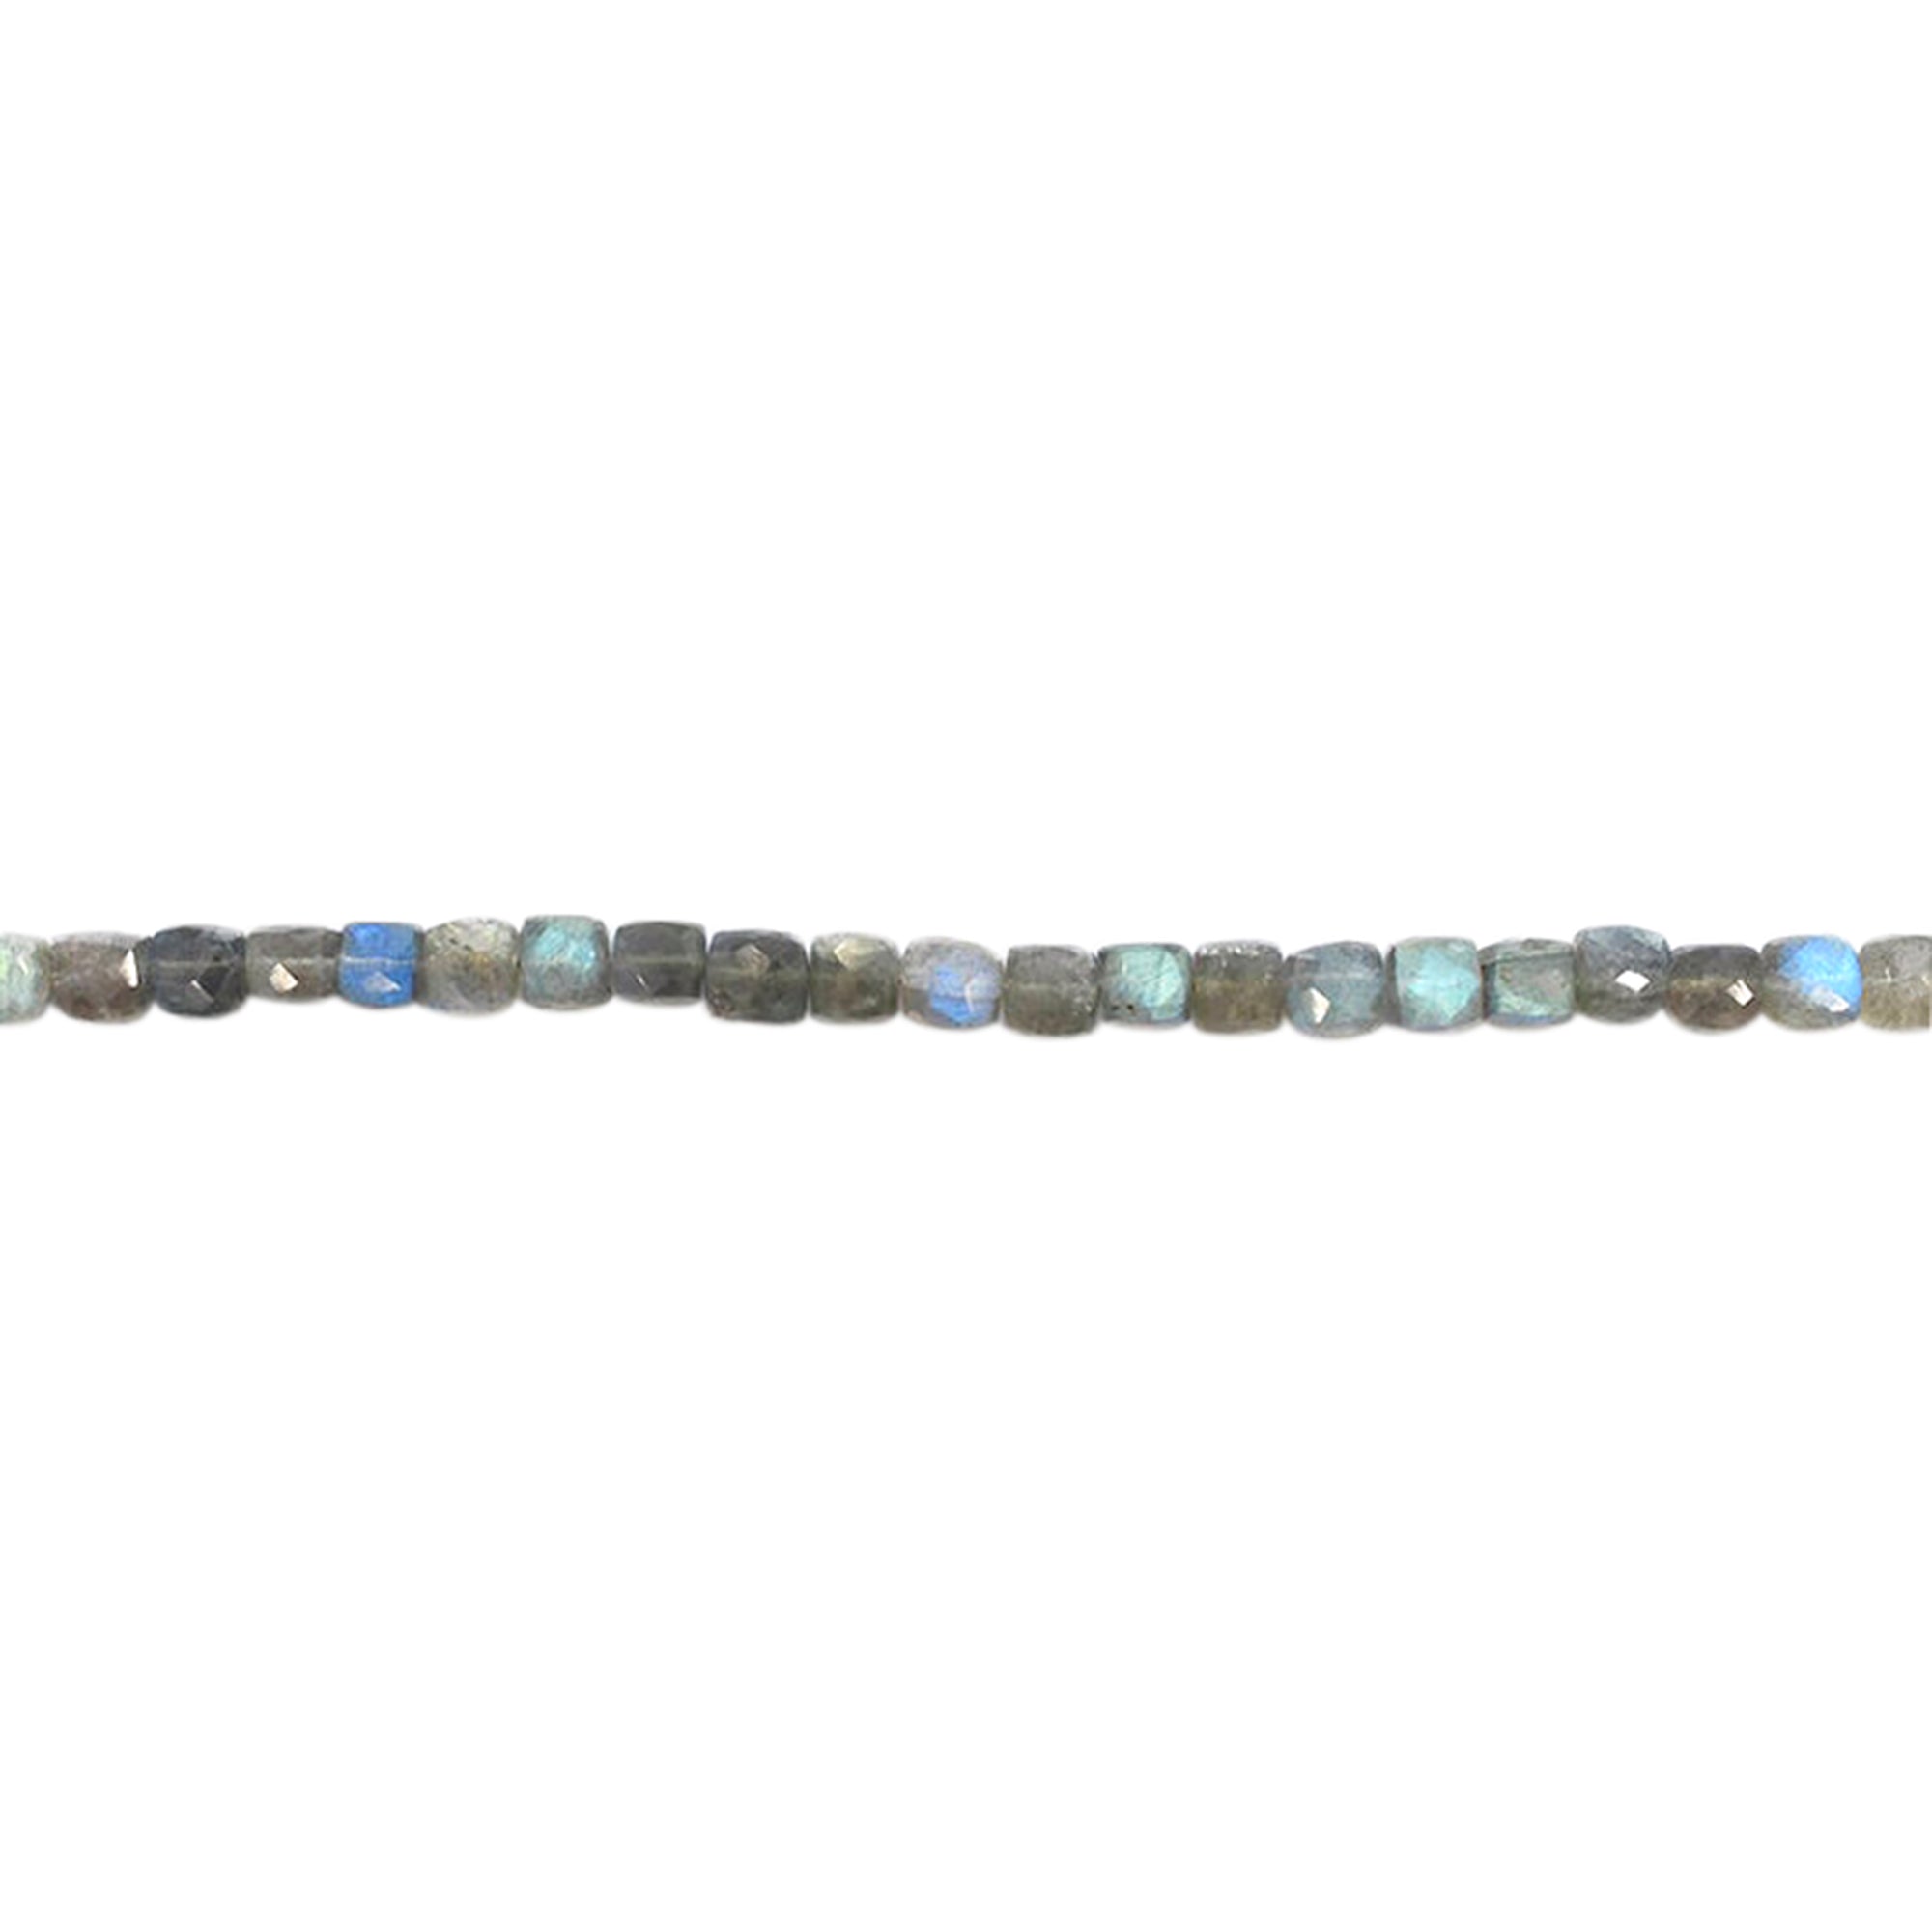 Labradorite 6 To 7 MM Faceted Cube Shape Beads Strand